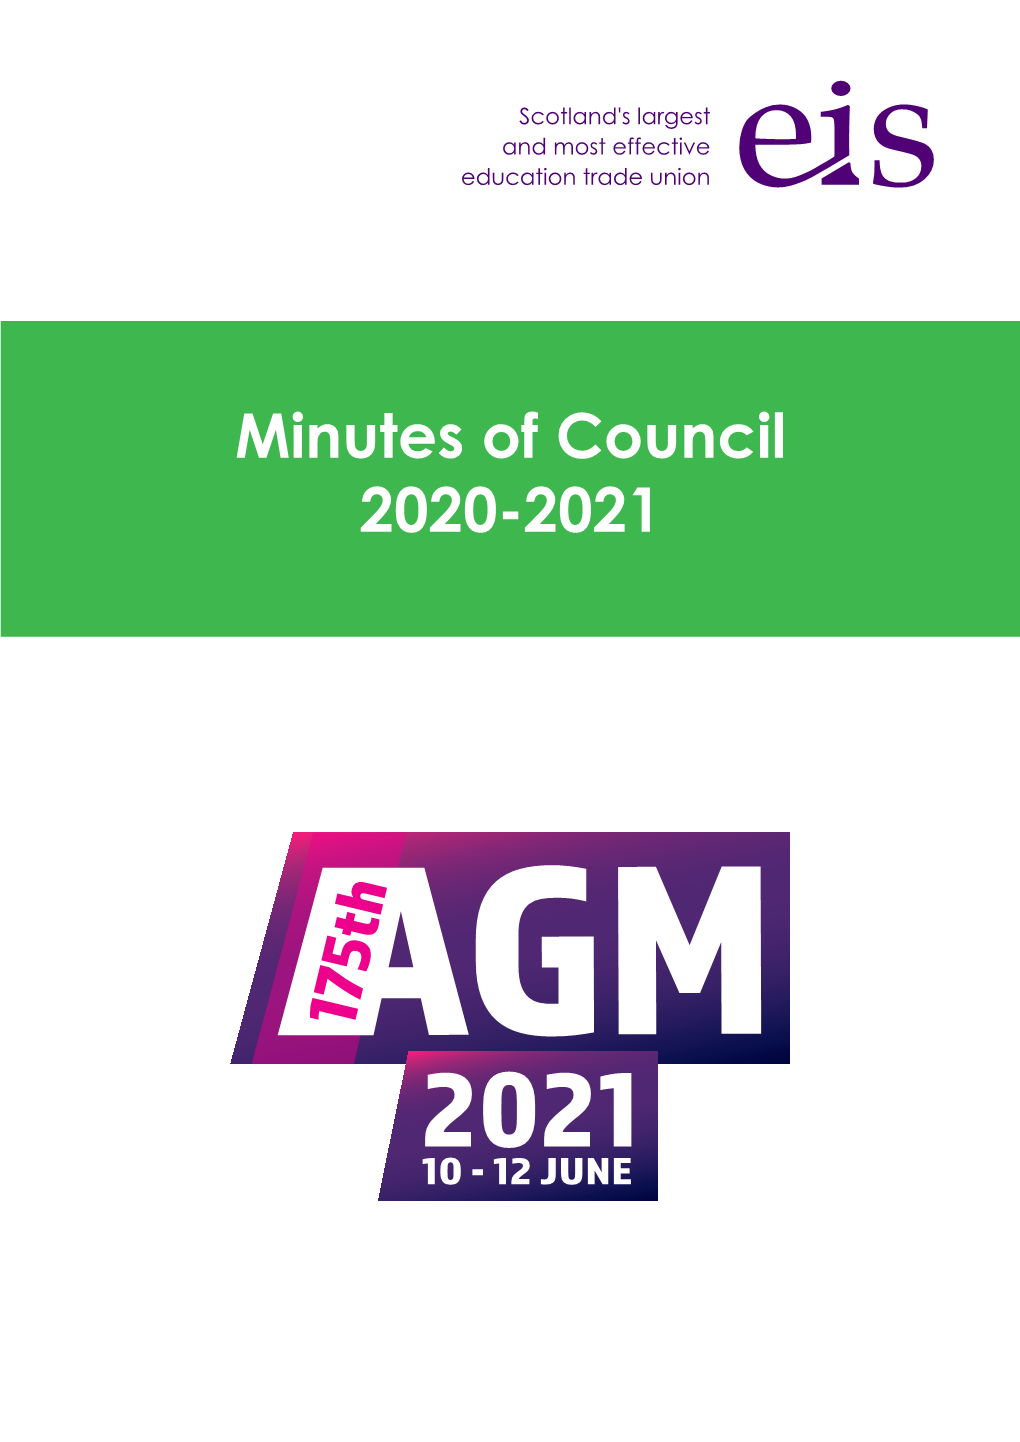 Minutes of Council 2020-2021